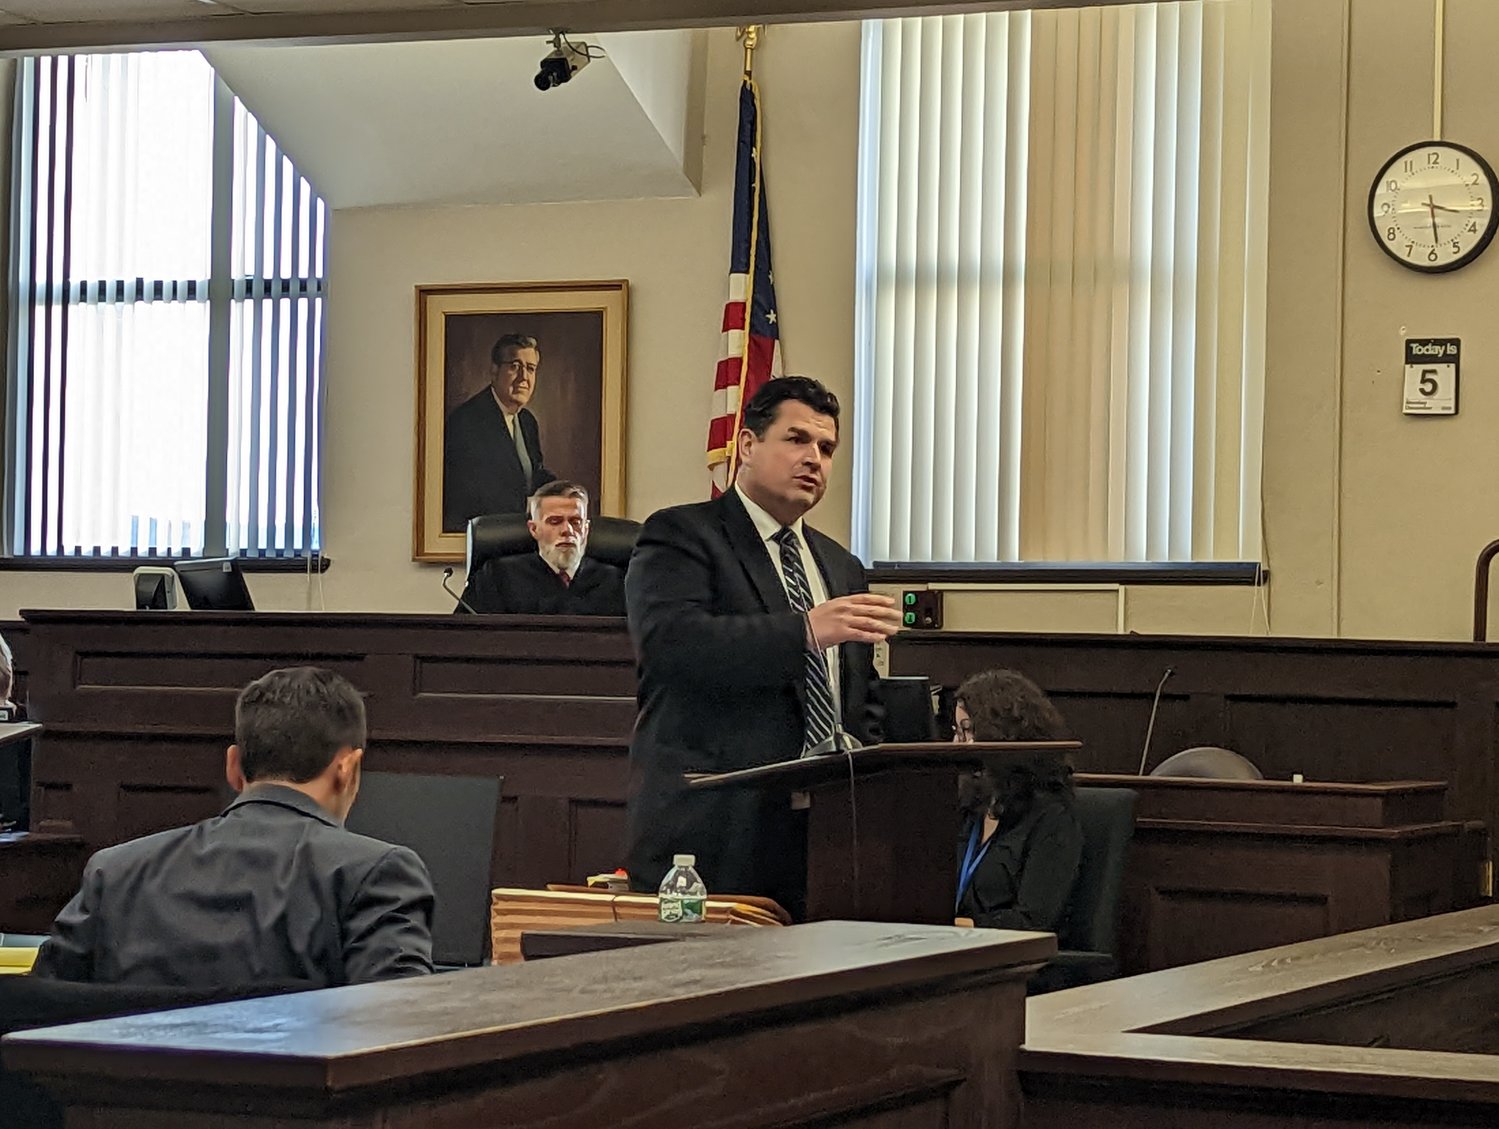 Public Defender Adam Tyksinski told the jury Monday afternoon that Matthew Westcott acted selflessly to save his family after the victim, James Westcott, had earlier that day threatened to burn down the house with everyone inside.